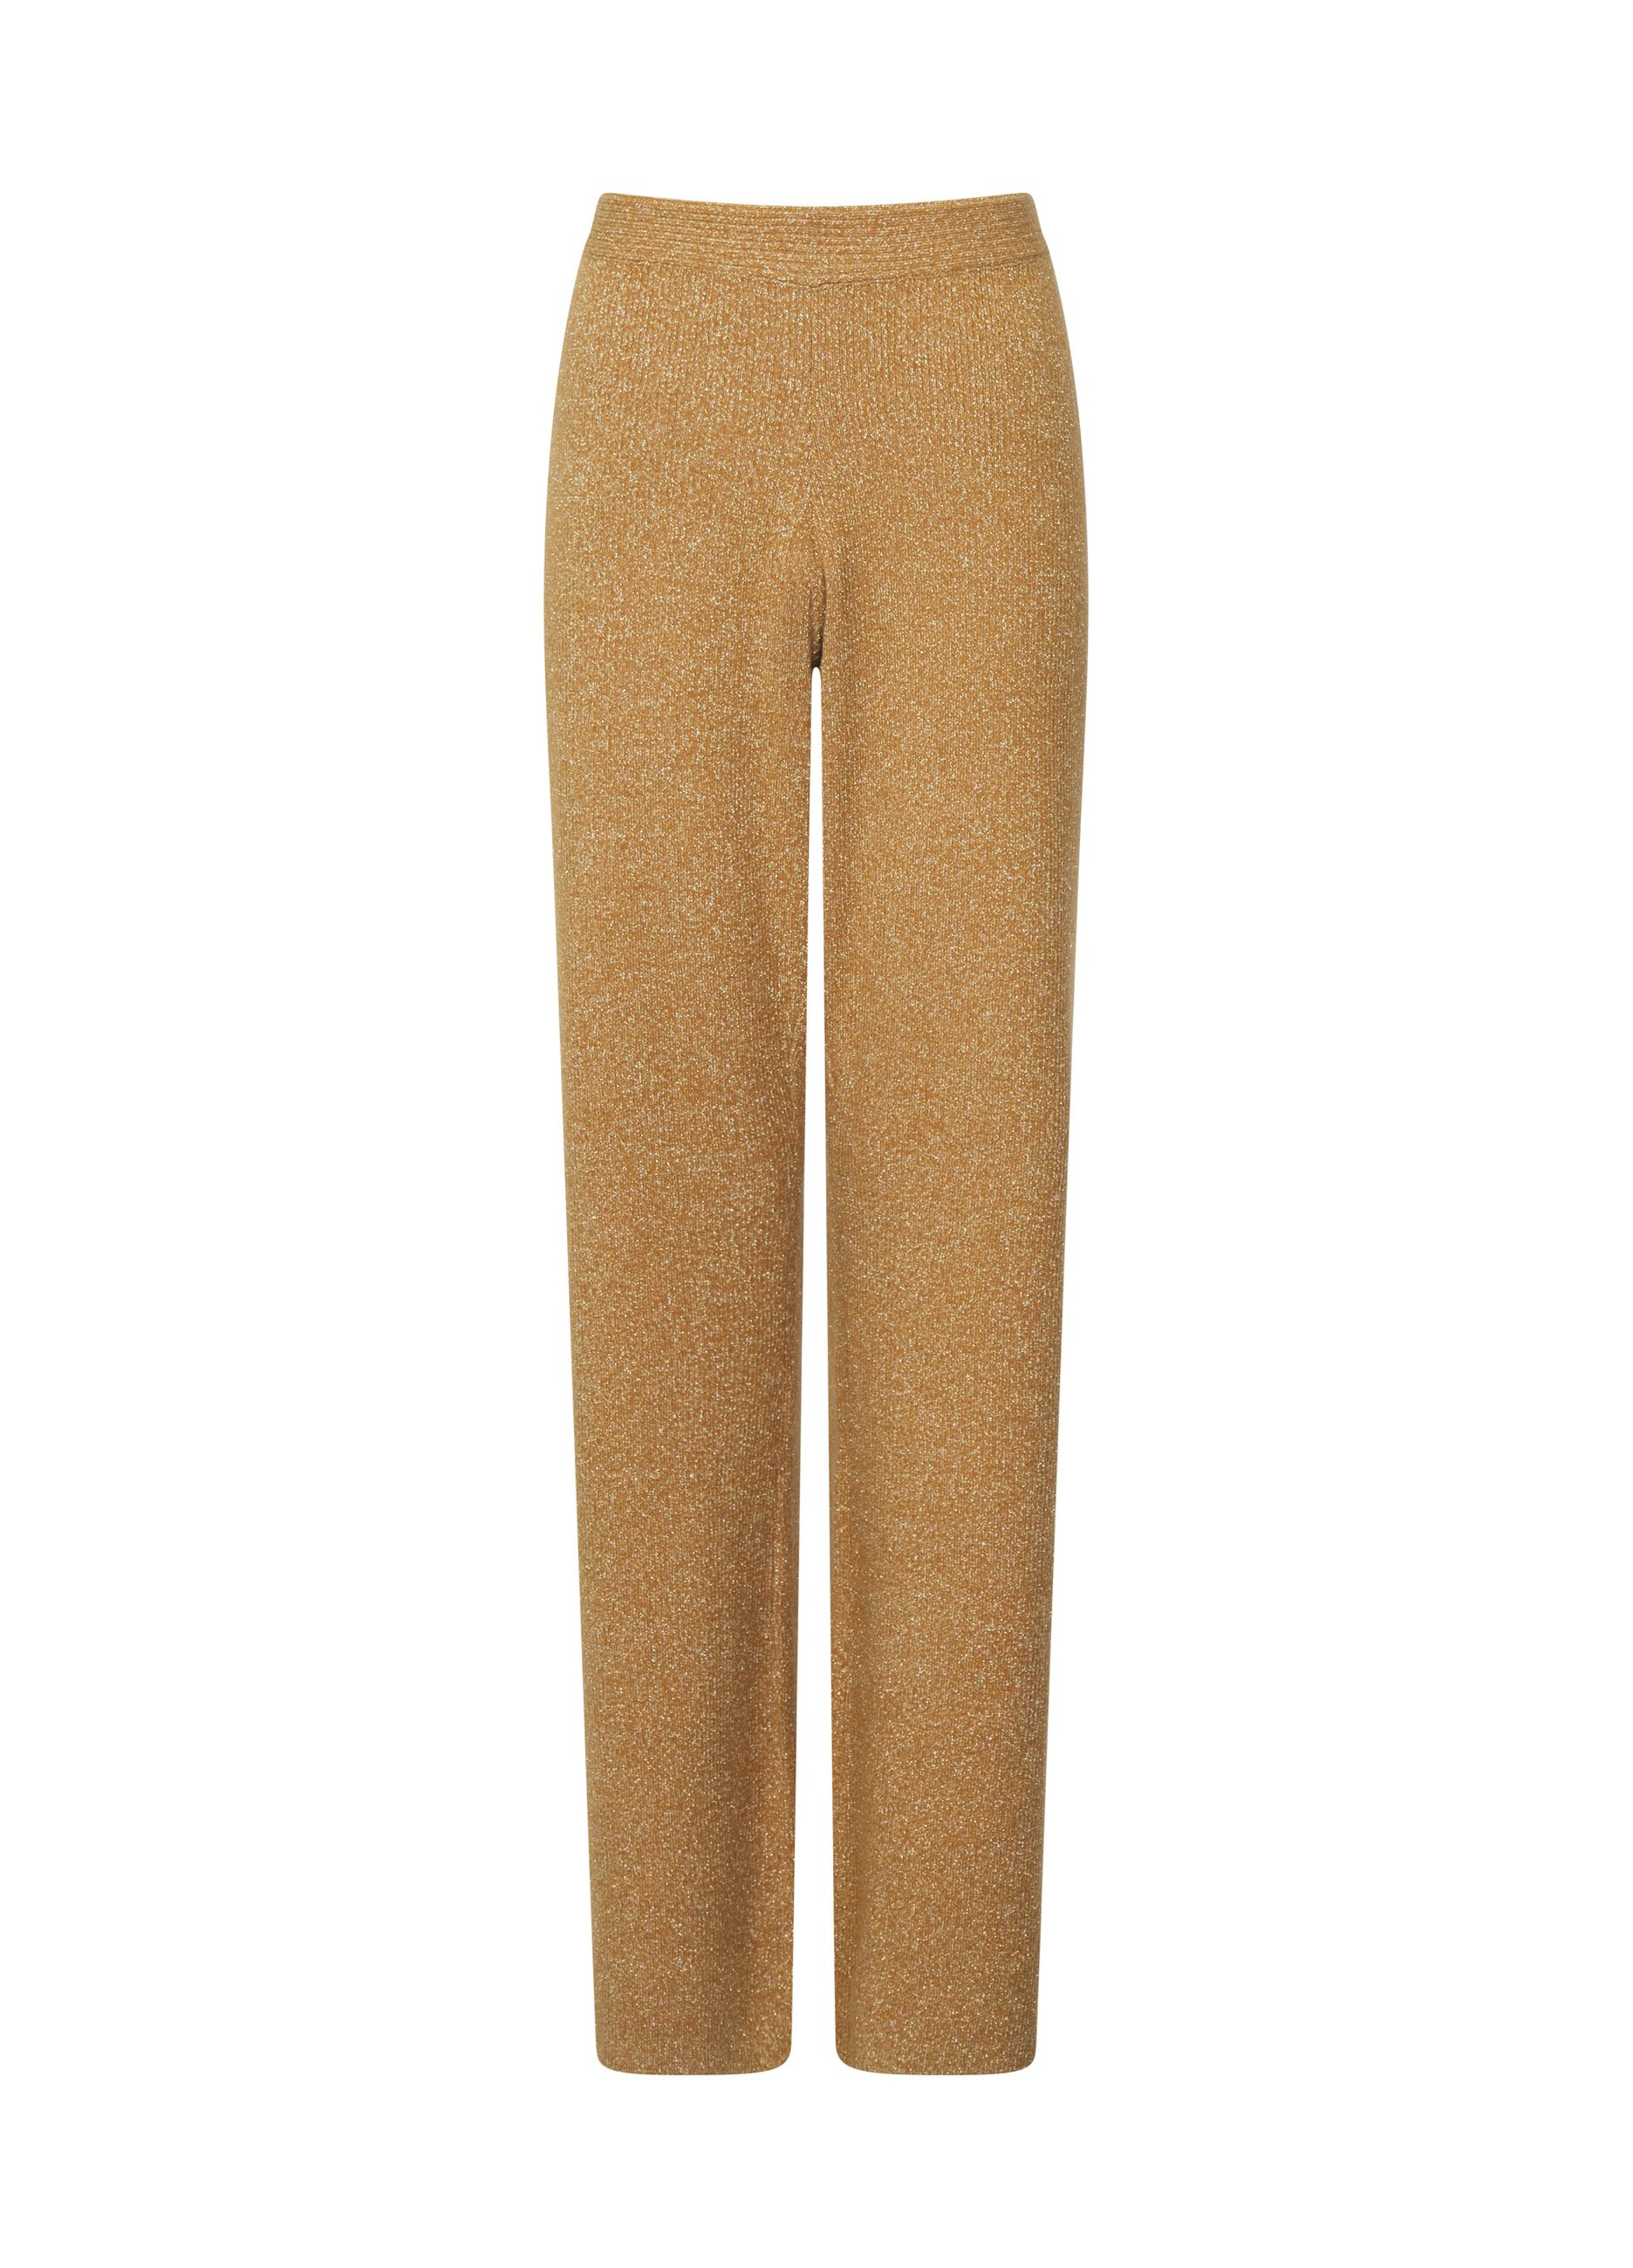 French Connection trousers with slits